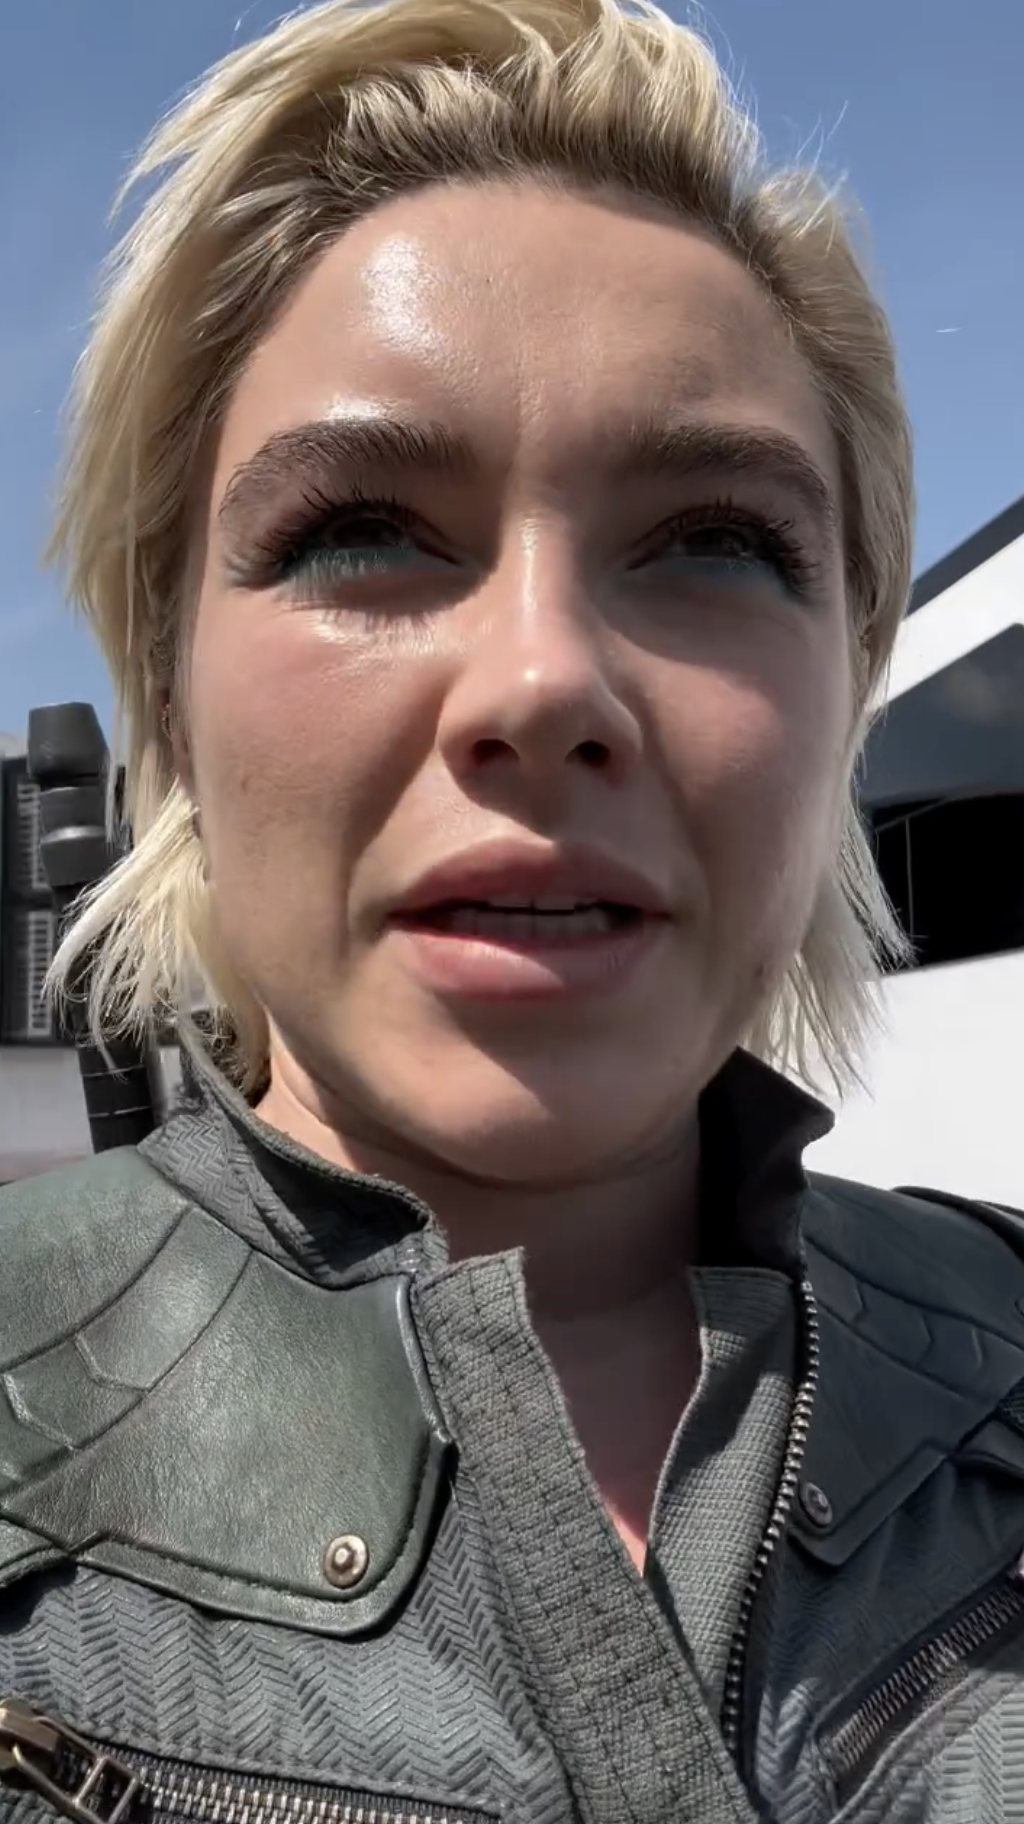 Florence Pugh with short blonde hair in a leather jacket, looking into the camera, with a bright sky behind